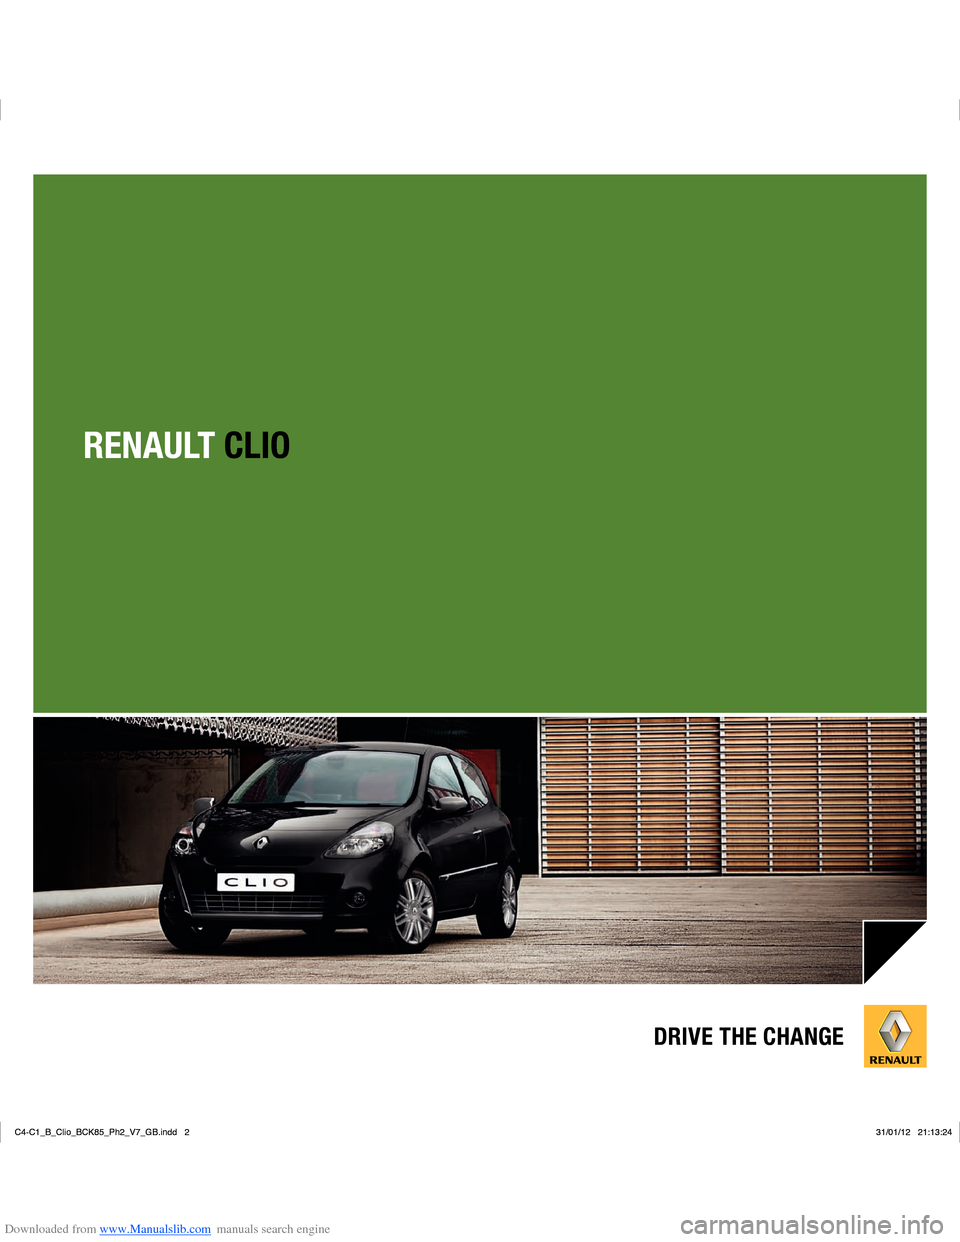 RENAULT CLIO 2012 X85 / 3.G User Manual Downloaded from www.Manualslib.com manuals search engine RENAULT CLIO
DRIVE THE CHANGE
C4-C1_B_Clio_BCK85_Ph2_V7_GB.indd   2
C4-C1_B_Clio_BCK85_Ph2_V7_GB.indd   231/01/12   21:13:24
31/01/12   21:13:2